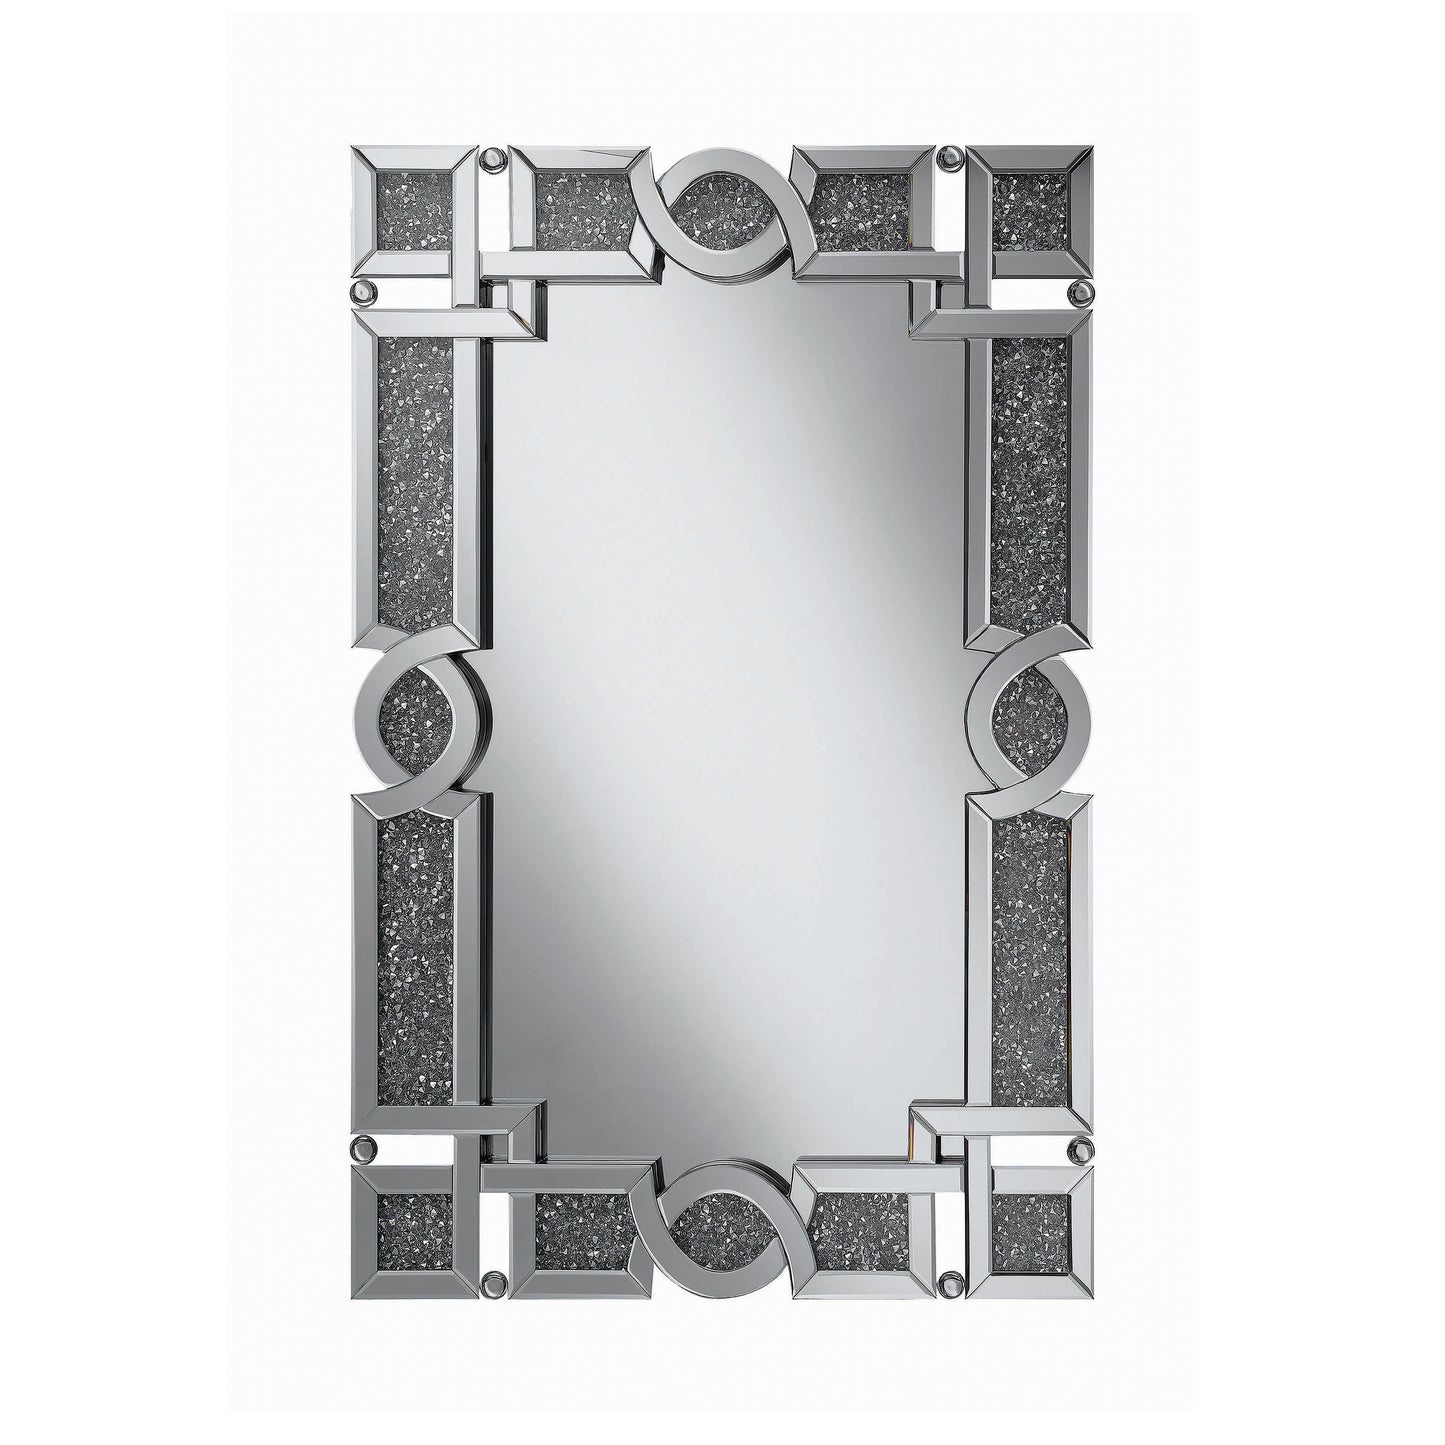 Interlocking Wall Mirror With Iridescent Panels And Beads Silver - 961444